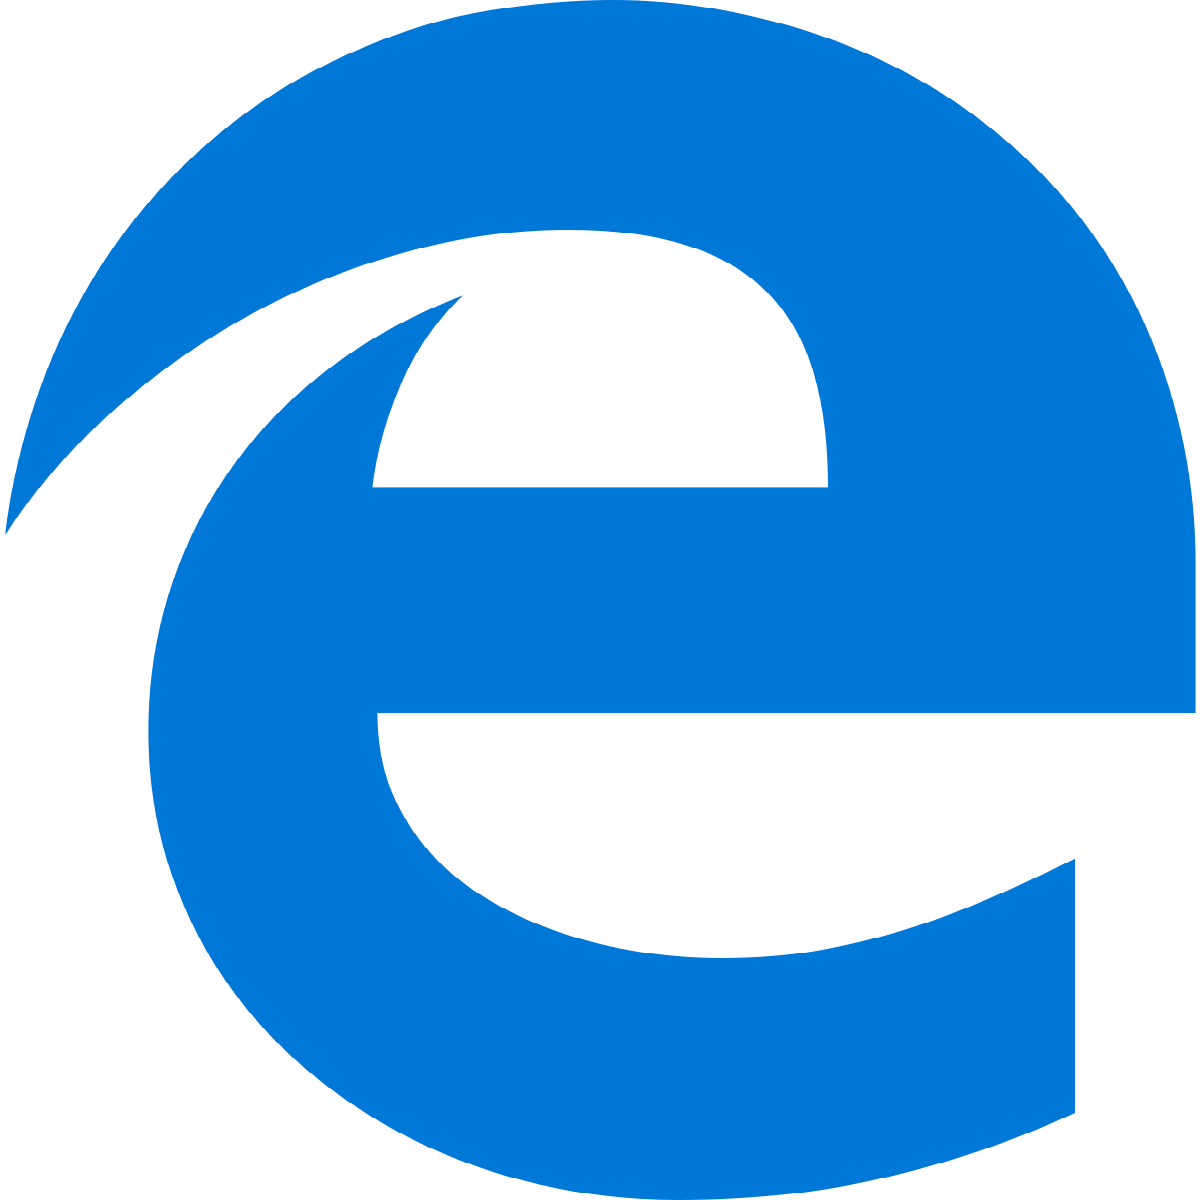 You'll be able to install Chrome extensions on Edge in the future